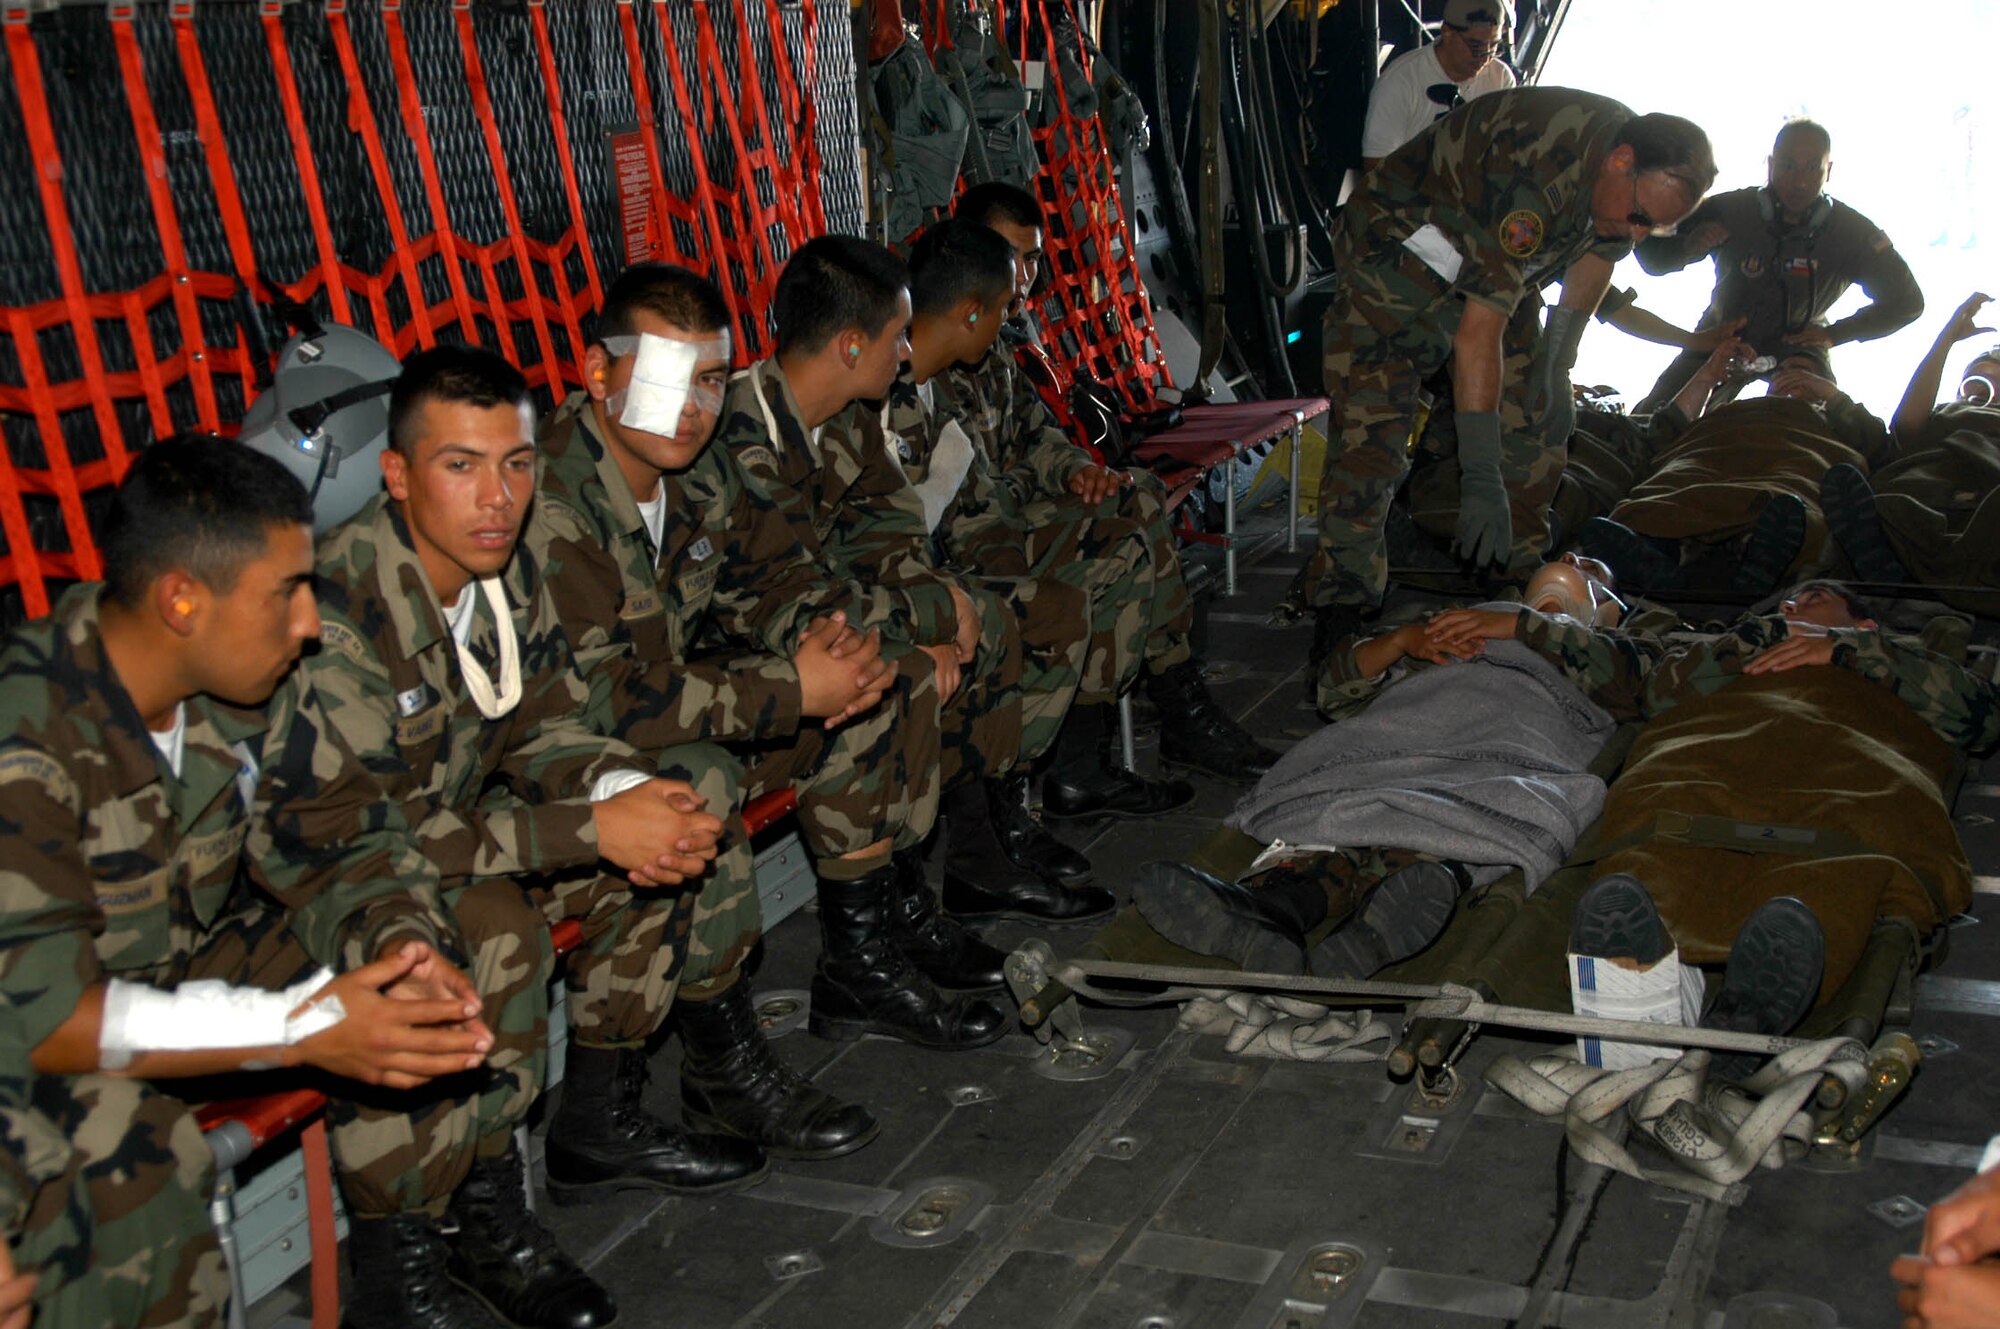 Simulated patients are transported via a U.S. HC-130 Hercules, assigned to the 48th Rescue Squadron at Davis-Monathan Air Force Base, Ariz., after being rescued by U.S. and Chilean Air Force pararescue personnel participating in NEWEN a three-day combined military exercise, April  8-10. The NEWEN exercise, focused on refueling operations, search and rescue tactics and dissimilar aircraft maneuvers with members of the Chilean Air Force. (photo by U.S. Embassy- Chile)